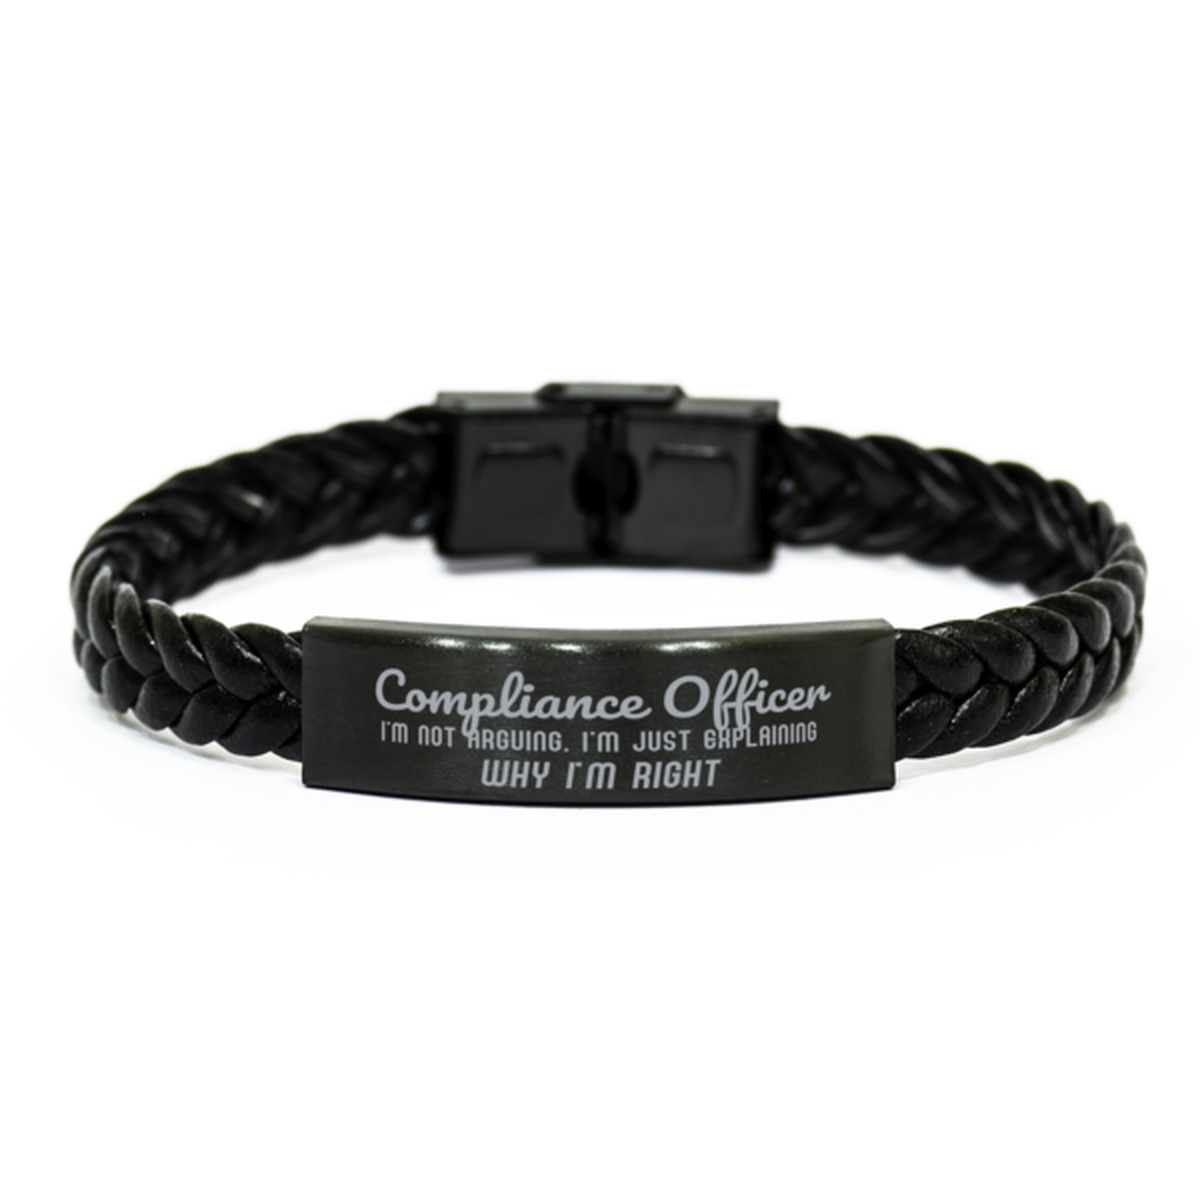 Compliance Officer I'm not Arguing. I'm Just Explaining Why I'm RIGHT Braided Leather Bracelet, Graduation Birthday Christmas Compliance Officer Gifts For Compliance Officer Funny Saying Quote Present for Men Women Coworker